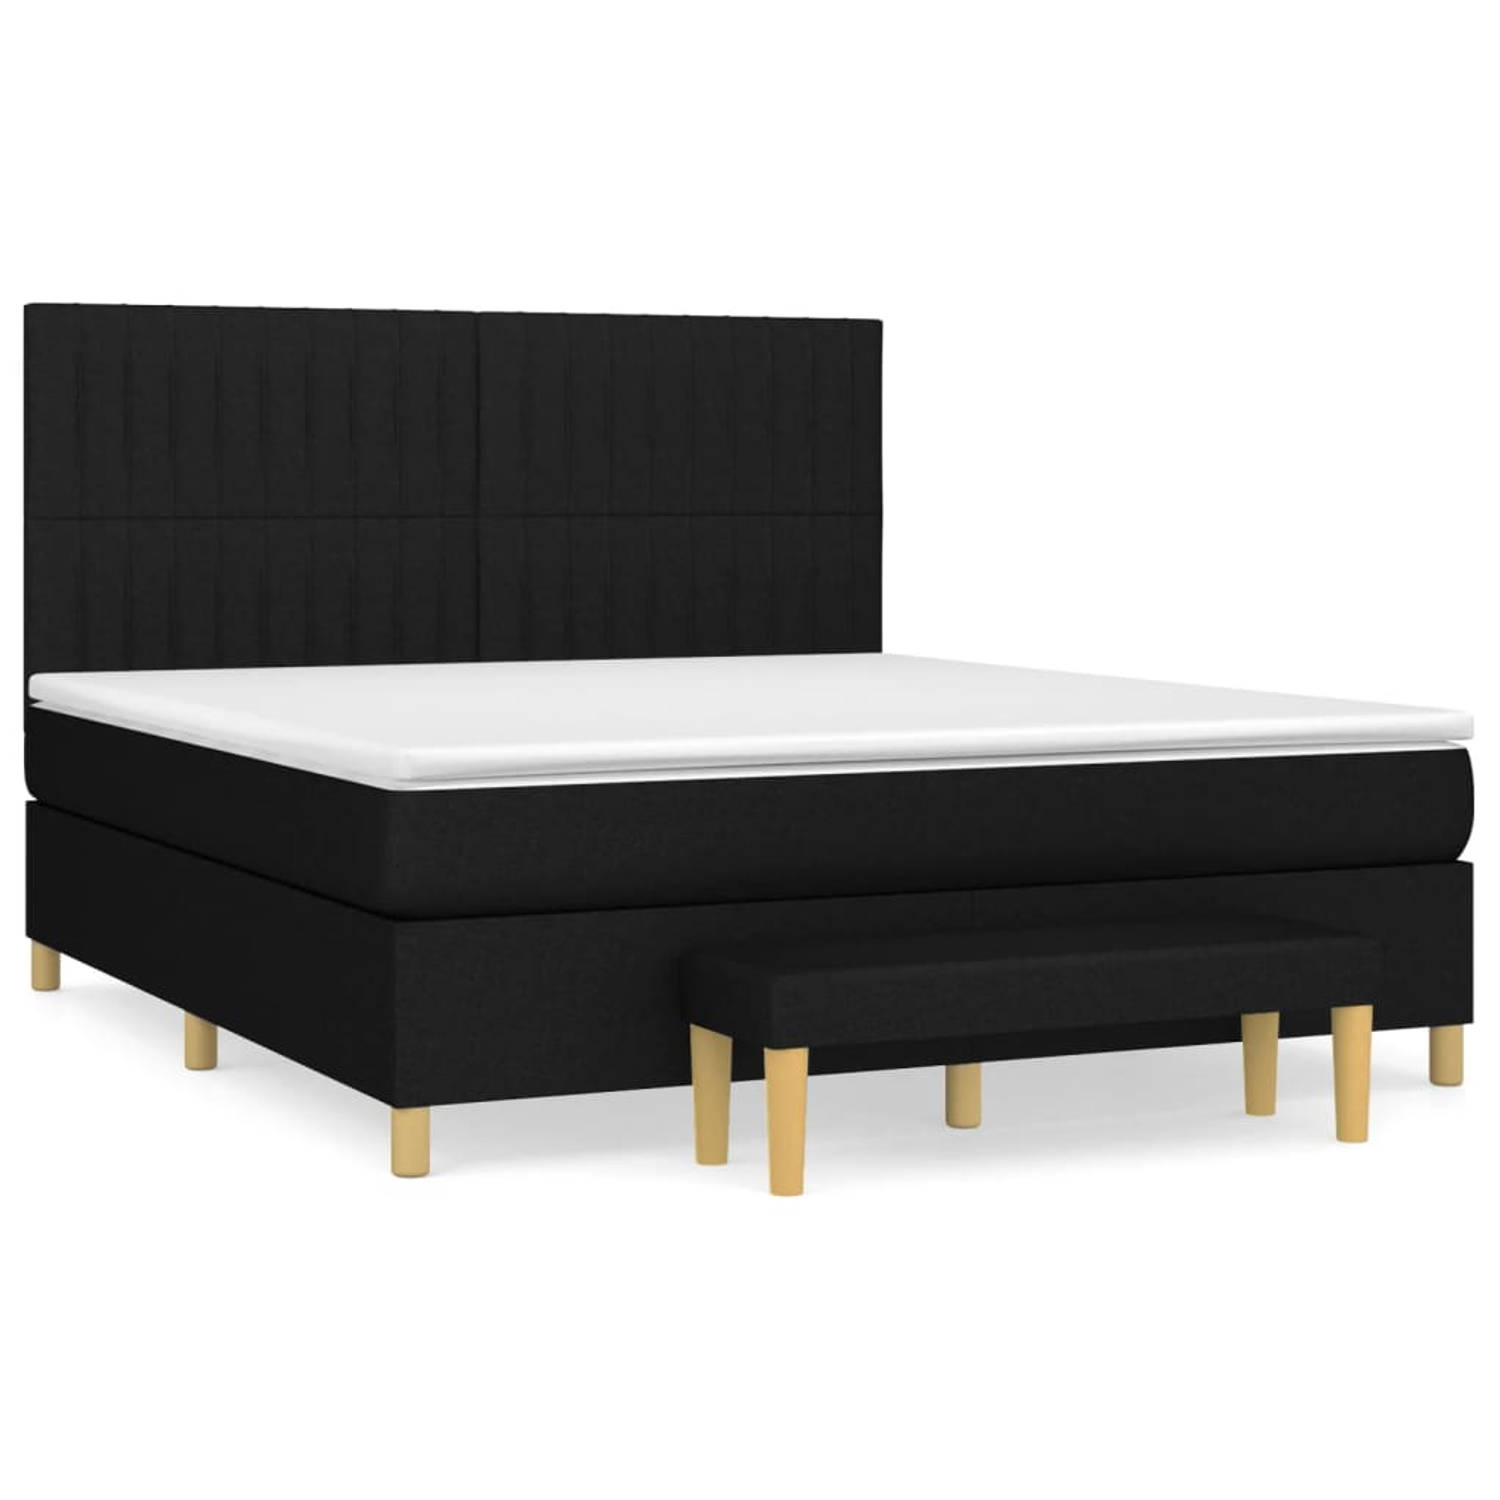 The Living Store Boxspringbed - Comfort - Bed - 203 x 160 x 118/128 cm - Zwart - Stof - Multiplex - Hout